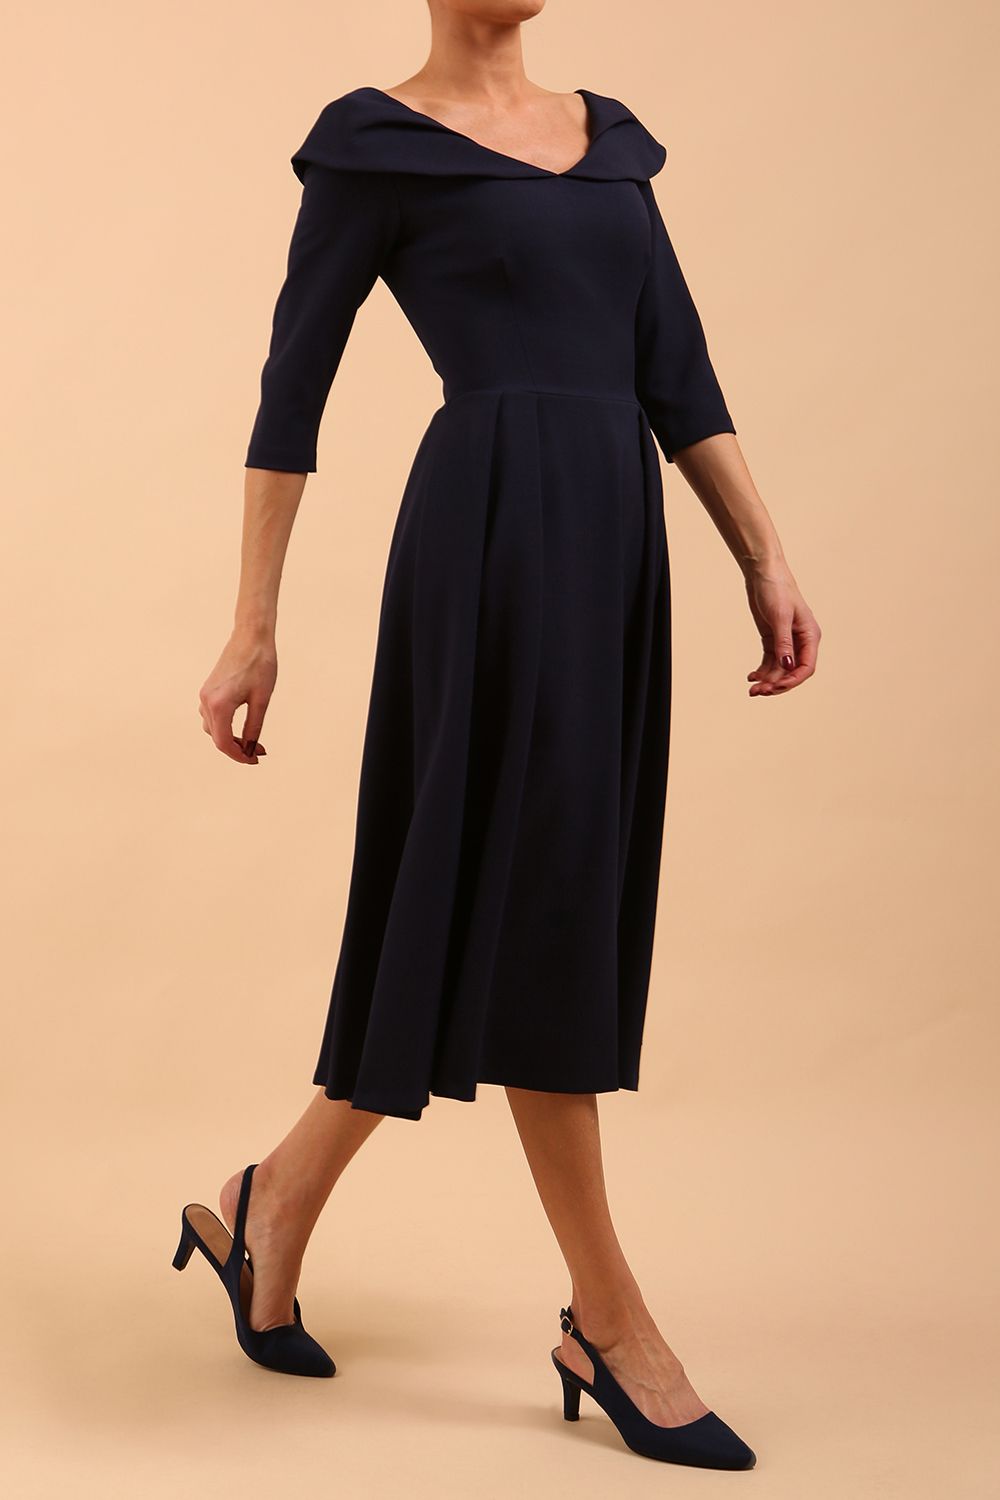 Model wearing Diva Catwalk Chesterton Sleeved dress with oversized collar detail and a-line swing pleated skirt in colour navy blue front